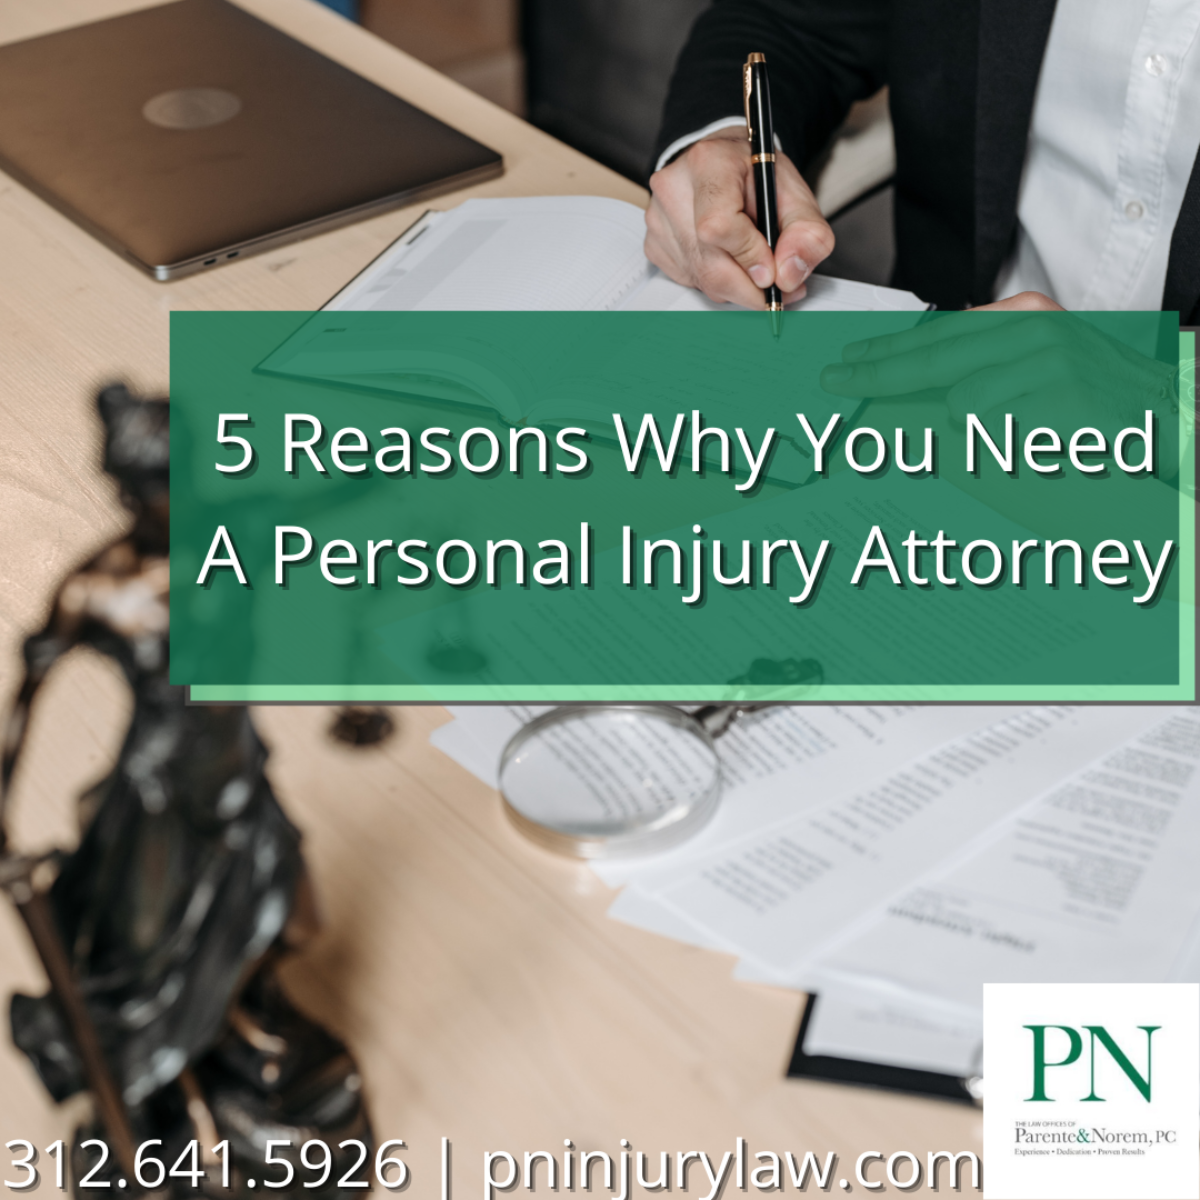 P&N Blog | 5 Reasons Why You Need A Personal Injury Attorney